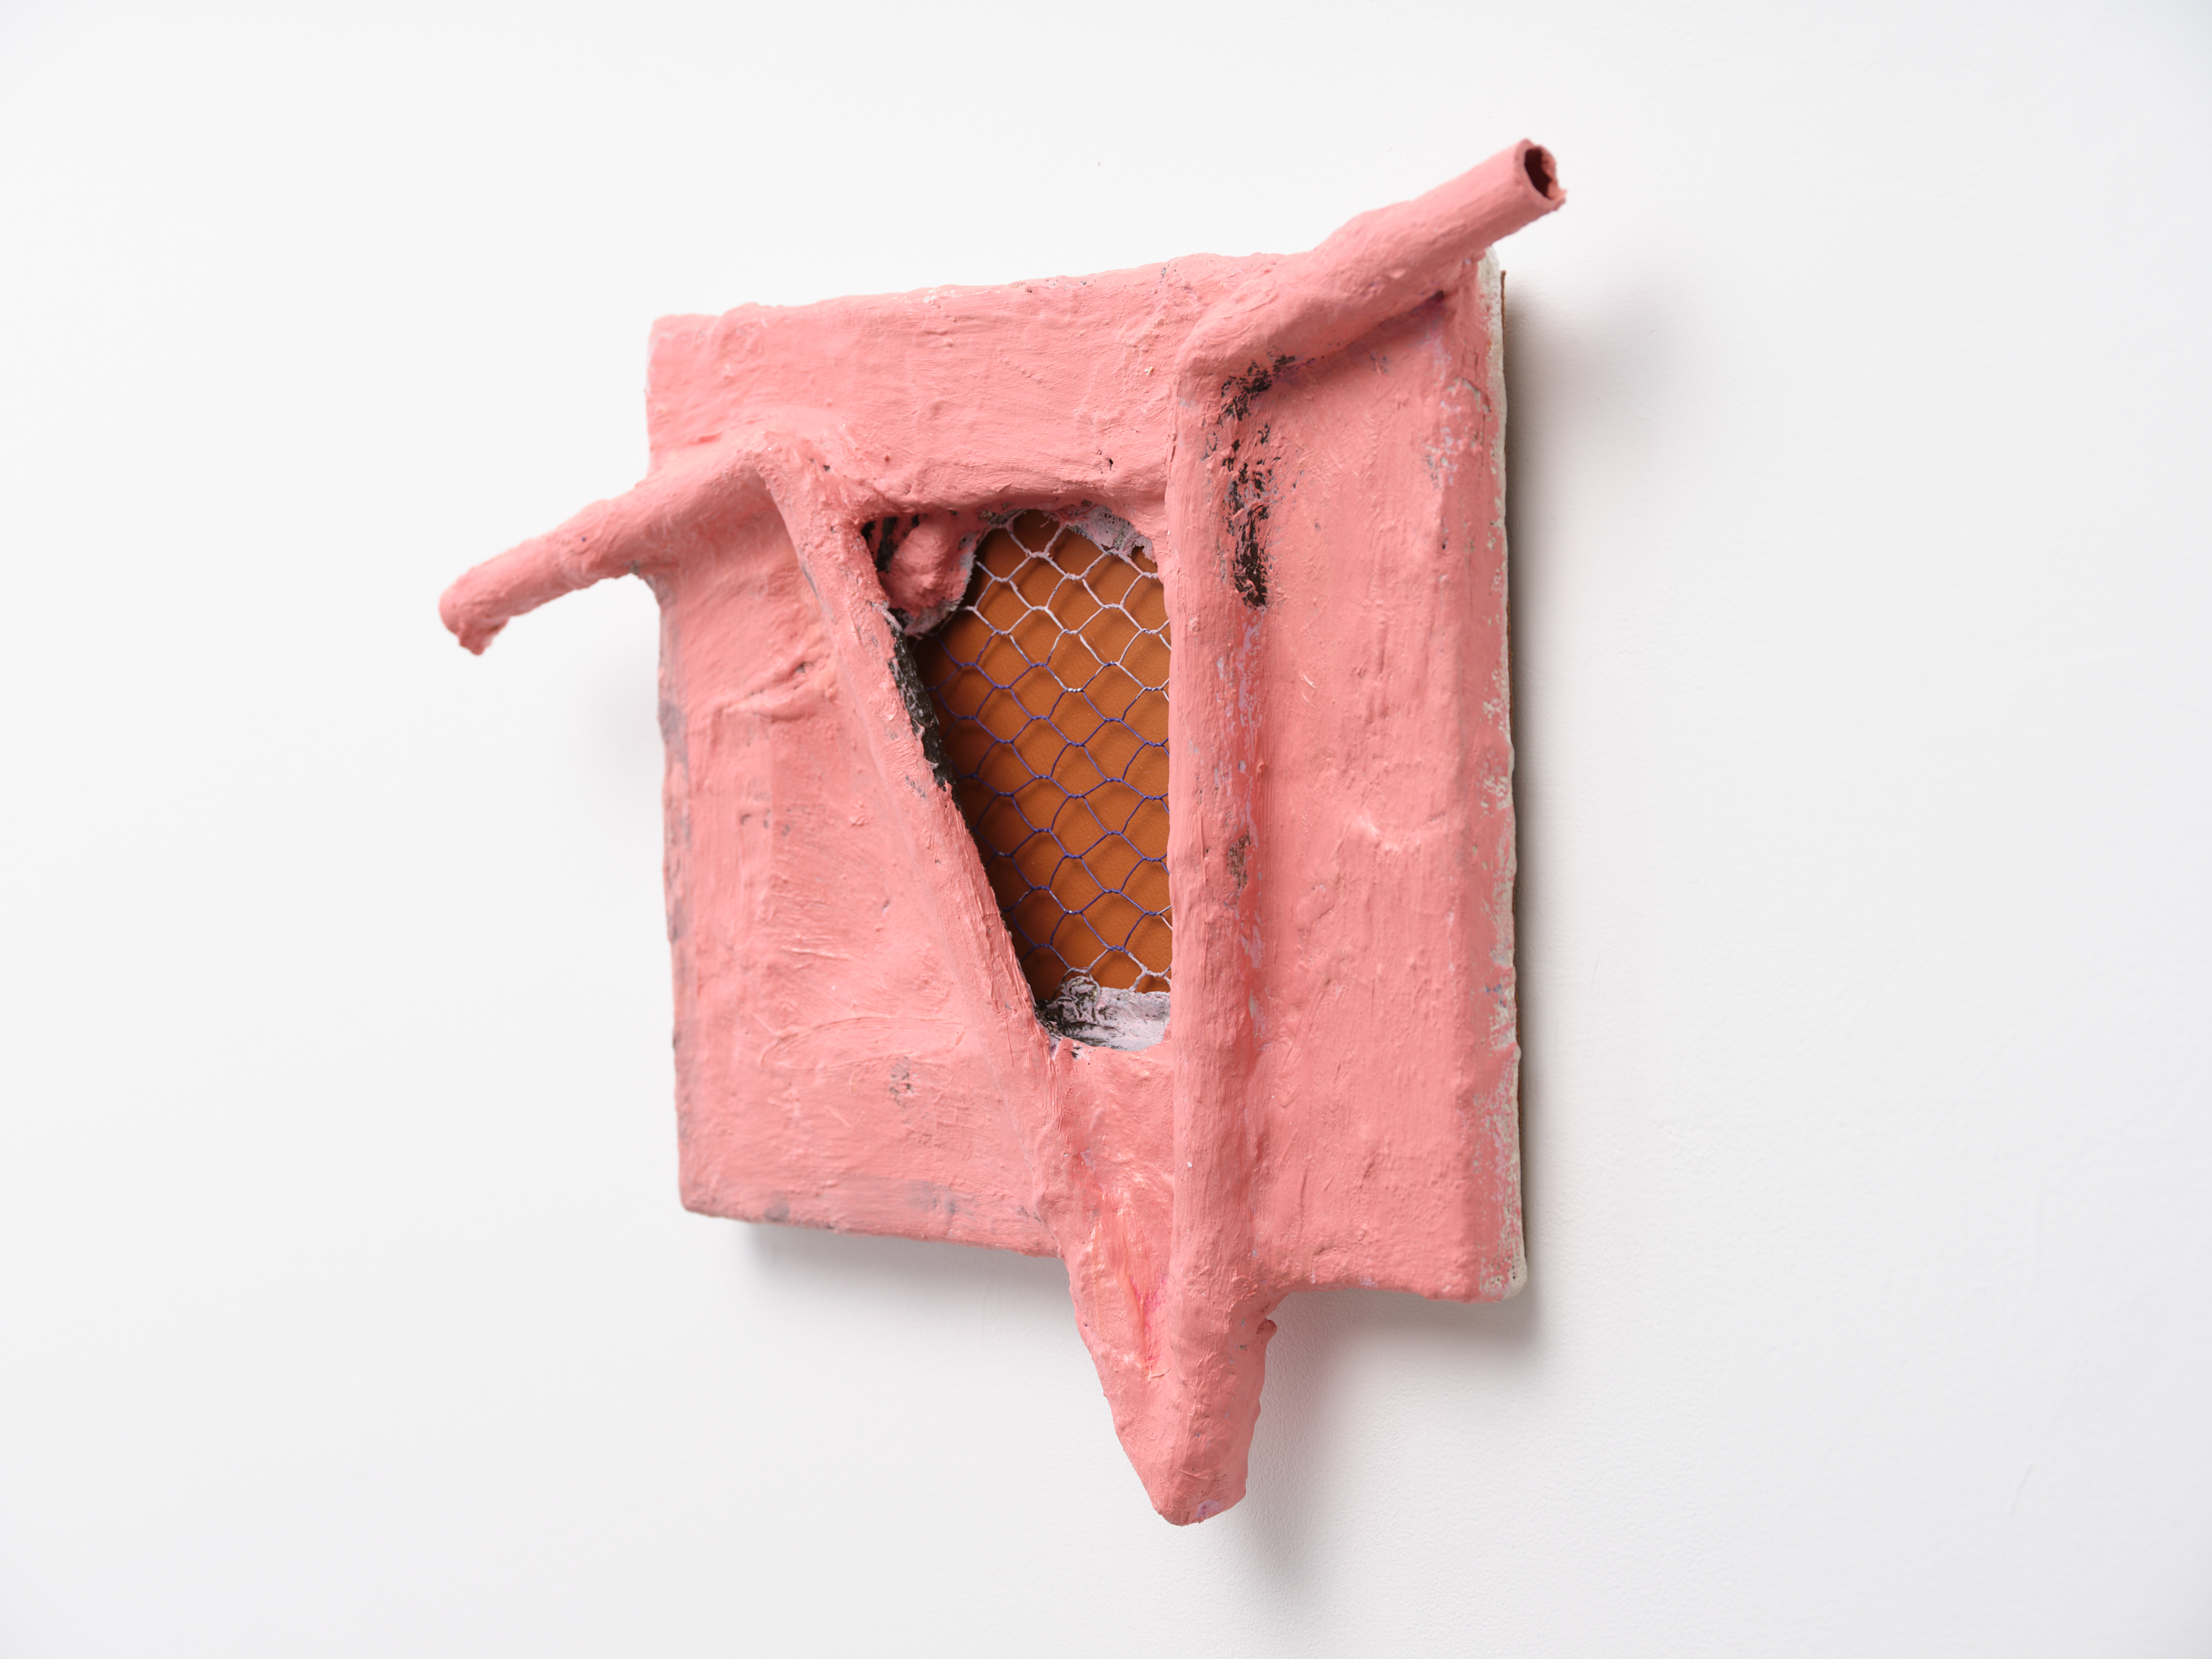 Sculptural painting by Rachel Walters in Plaster bandage, plumbers pipe, chicken wire, leather and oil on stretcher titled Front